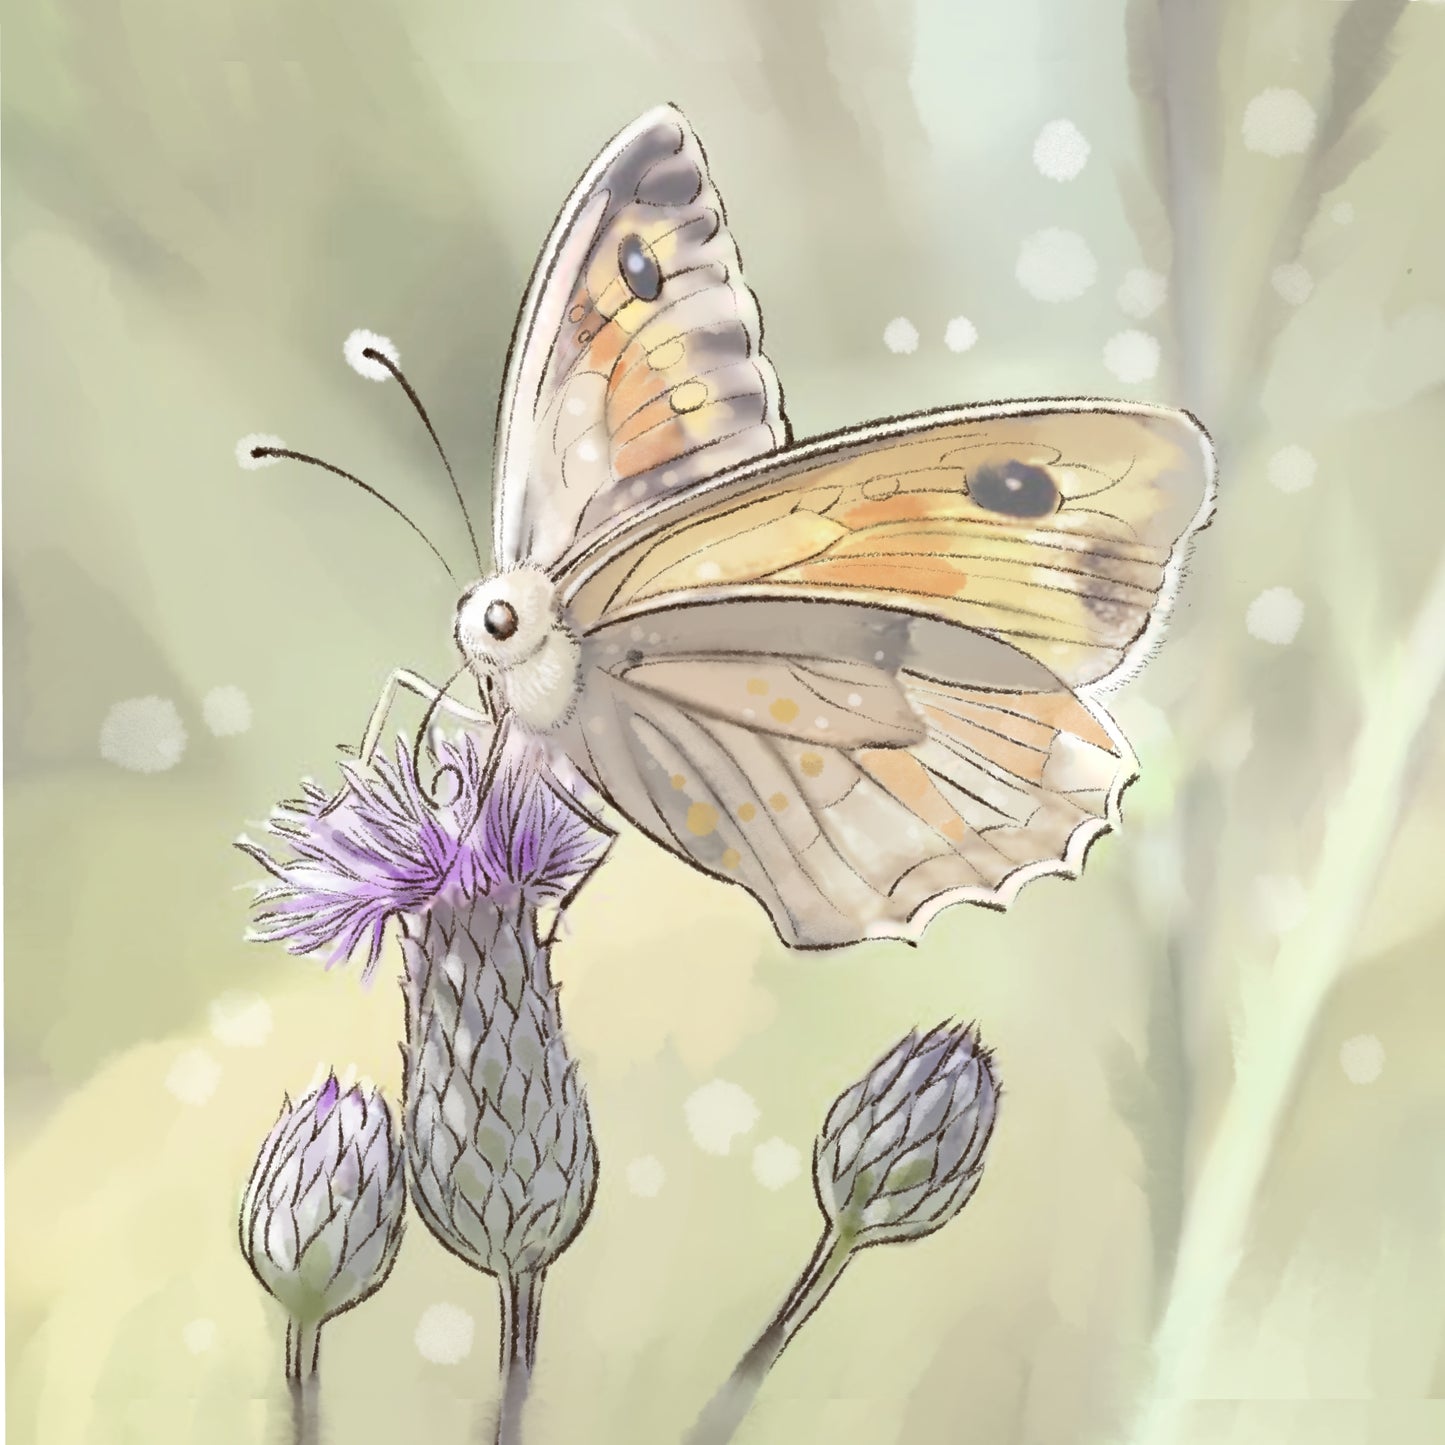 Butterfly in the Real World - Illustrated Print by Thomas Little